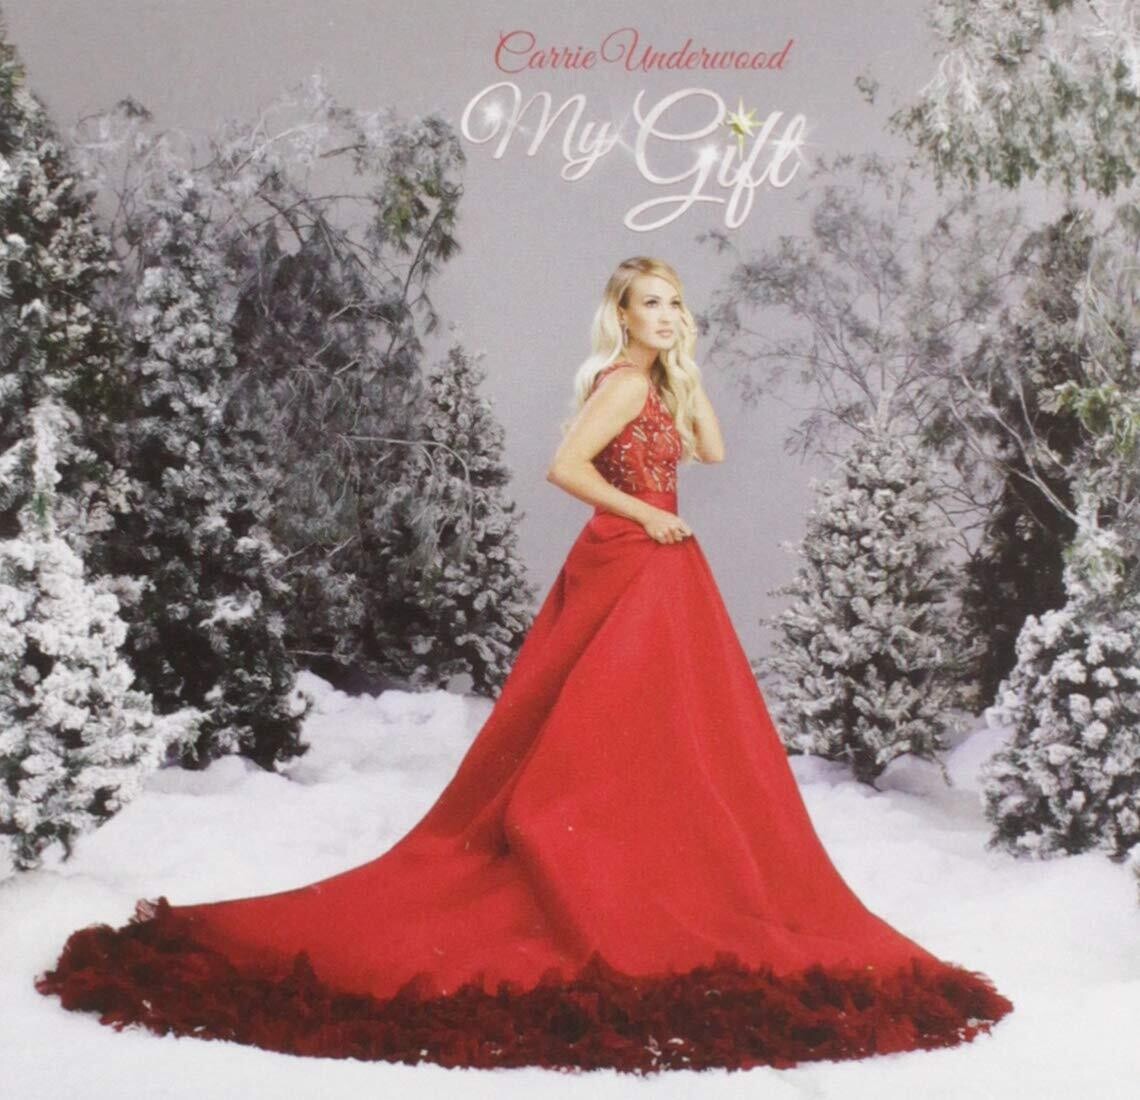 Carrie Underwood "My Gift"